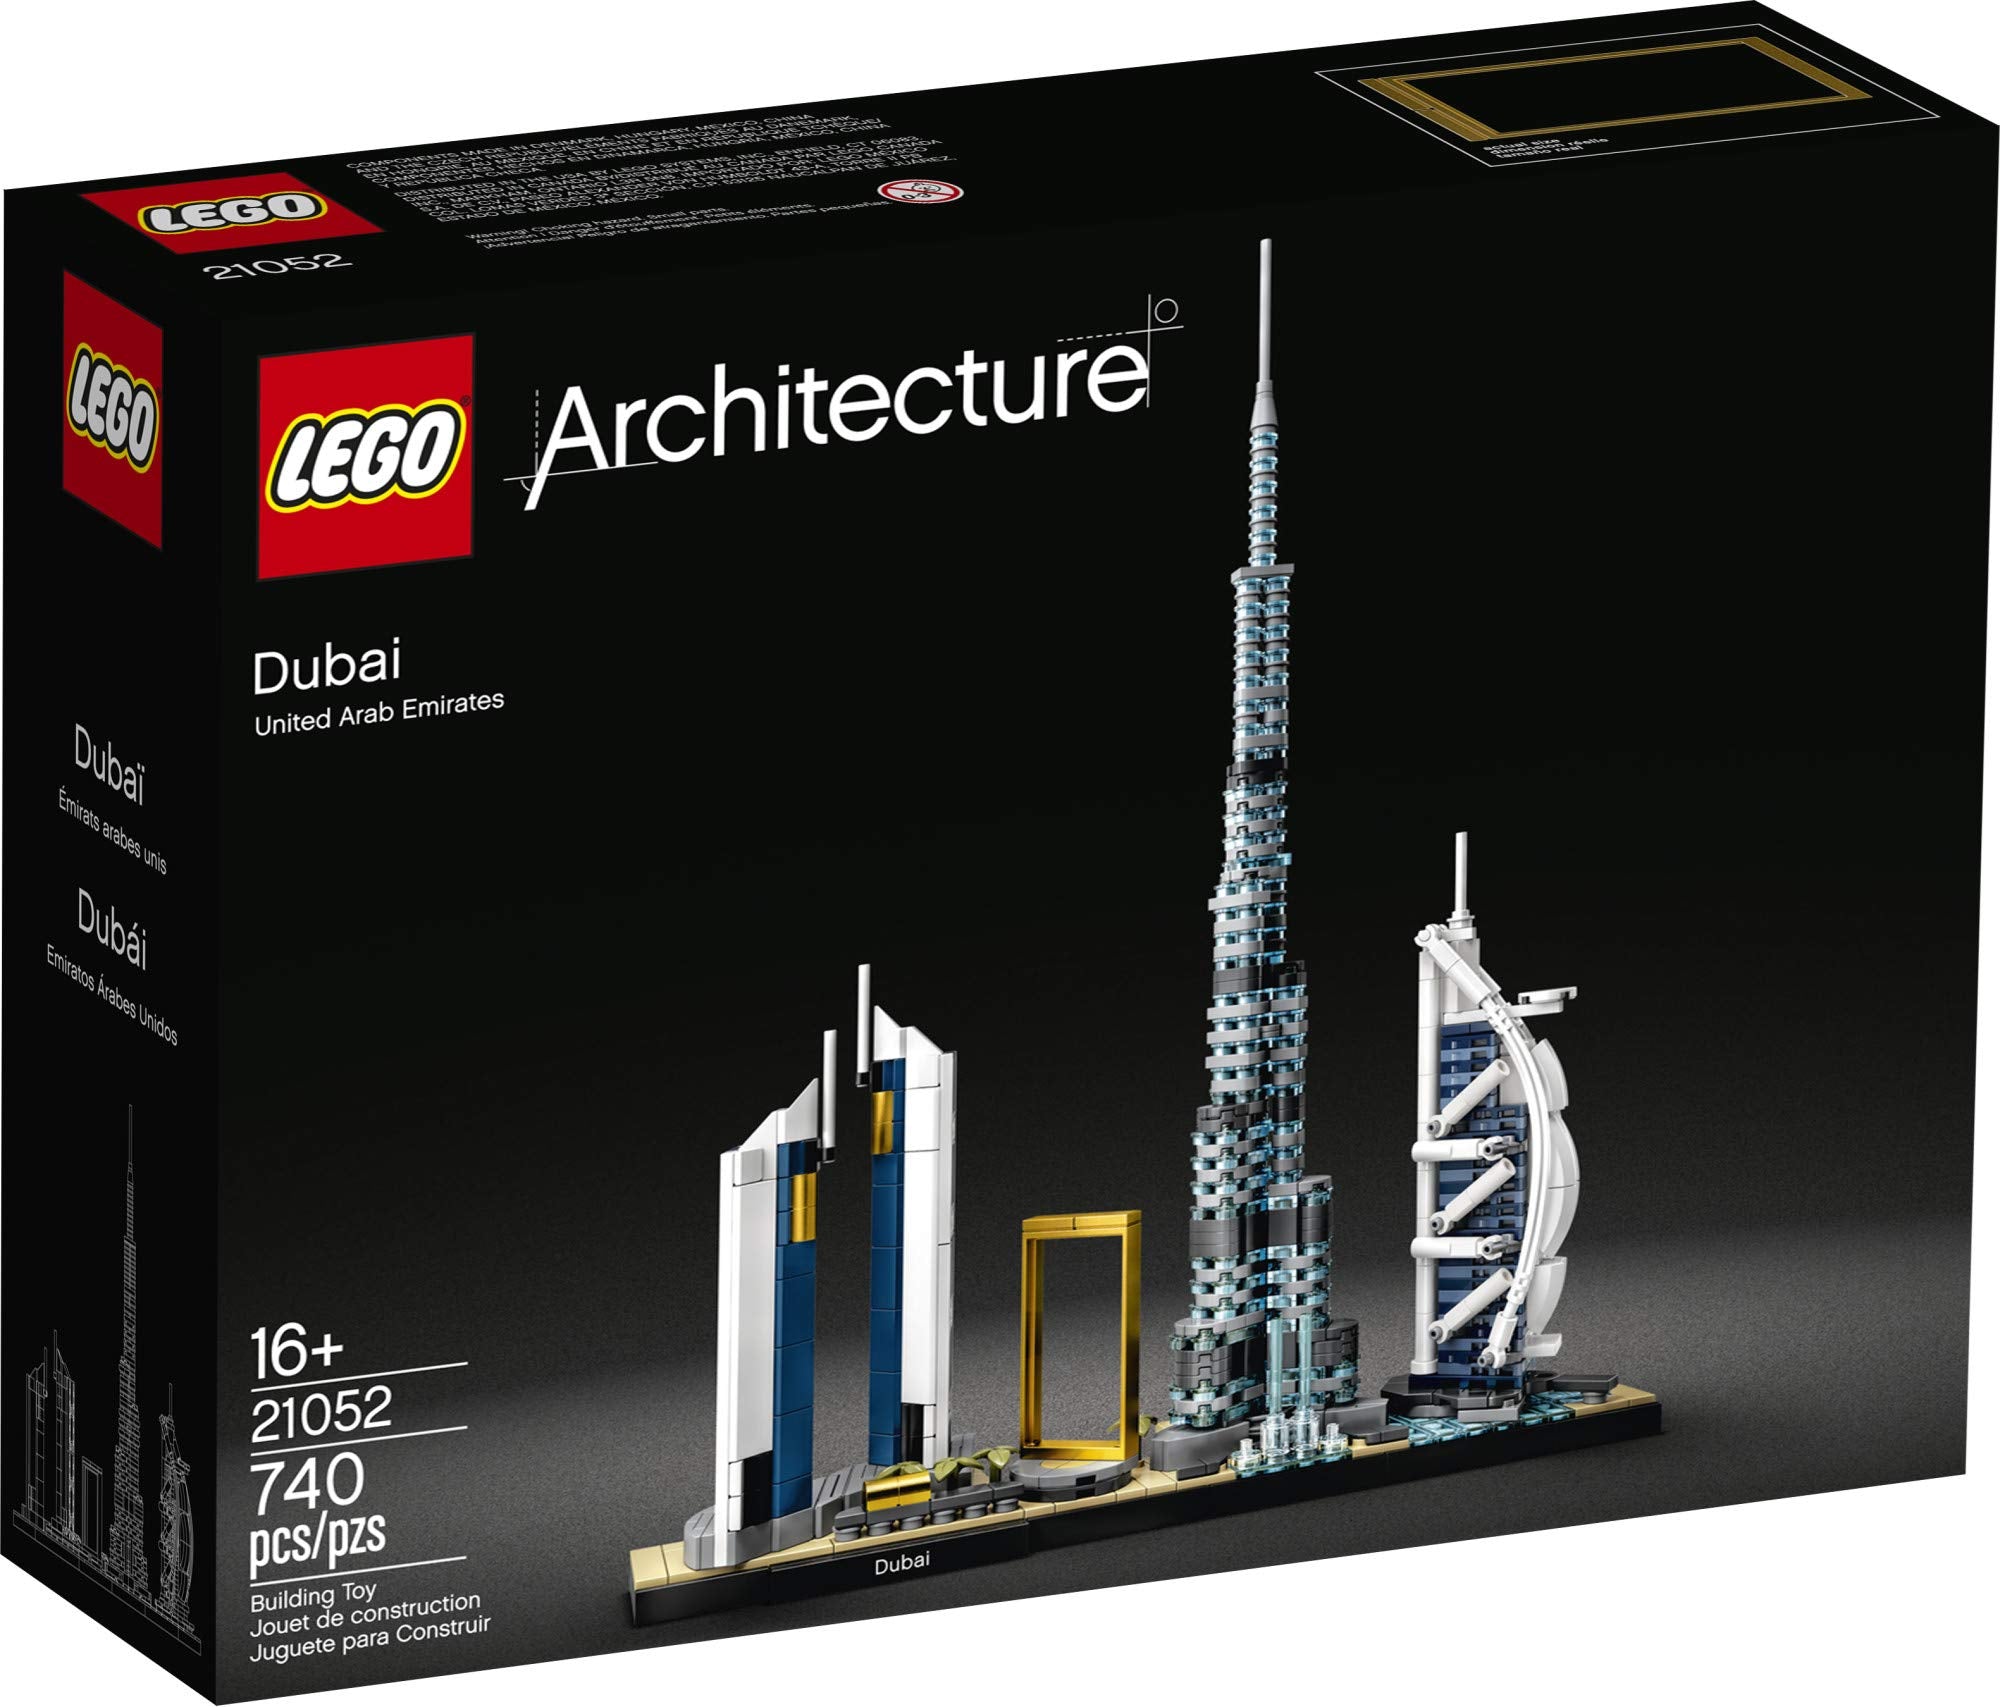 LEGO Architecture Skylines: Dubai 21052 Building Kit, Collectible Architecture Building Set for Adults (740 Pieces) (Like New, Open Box)